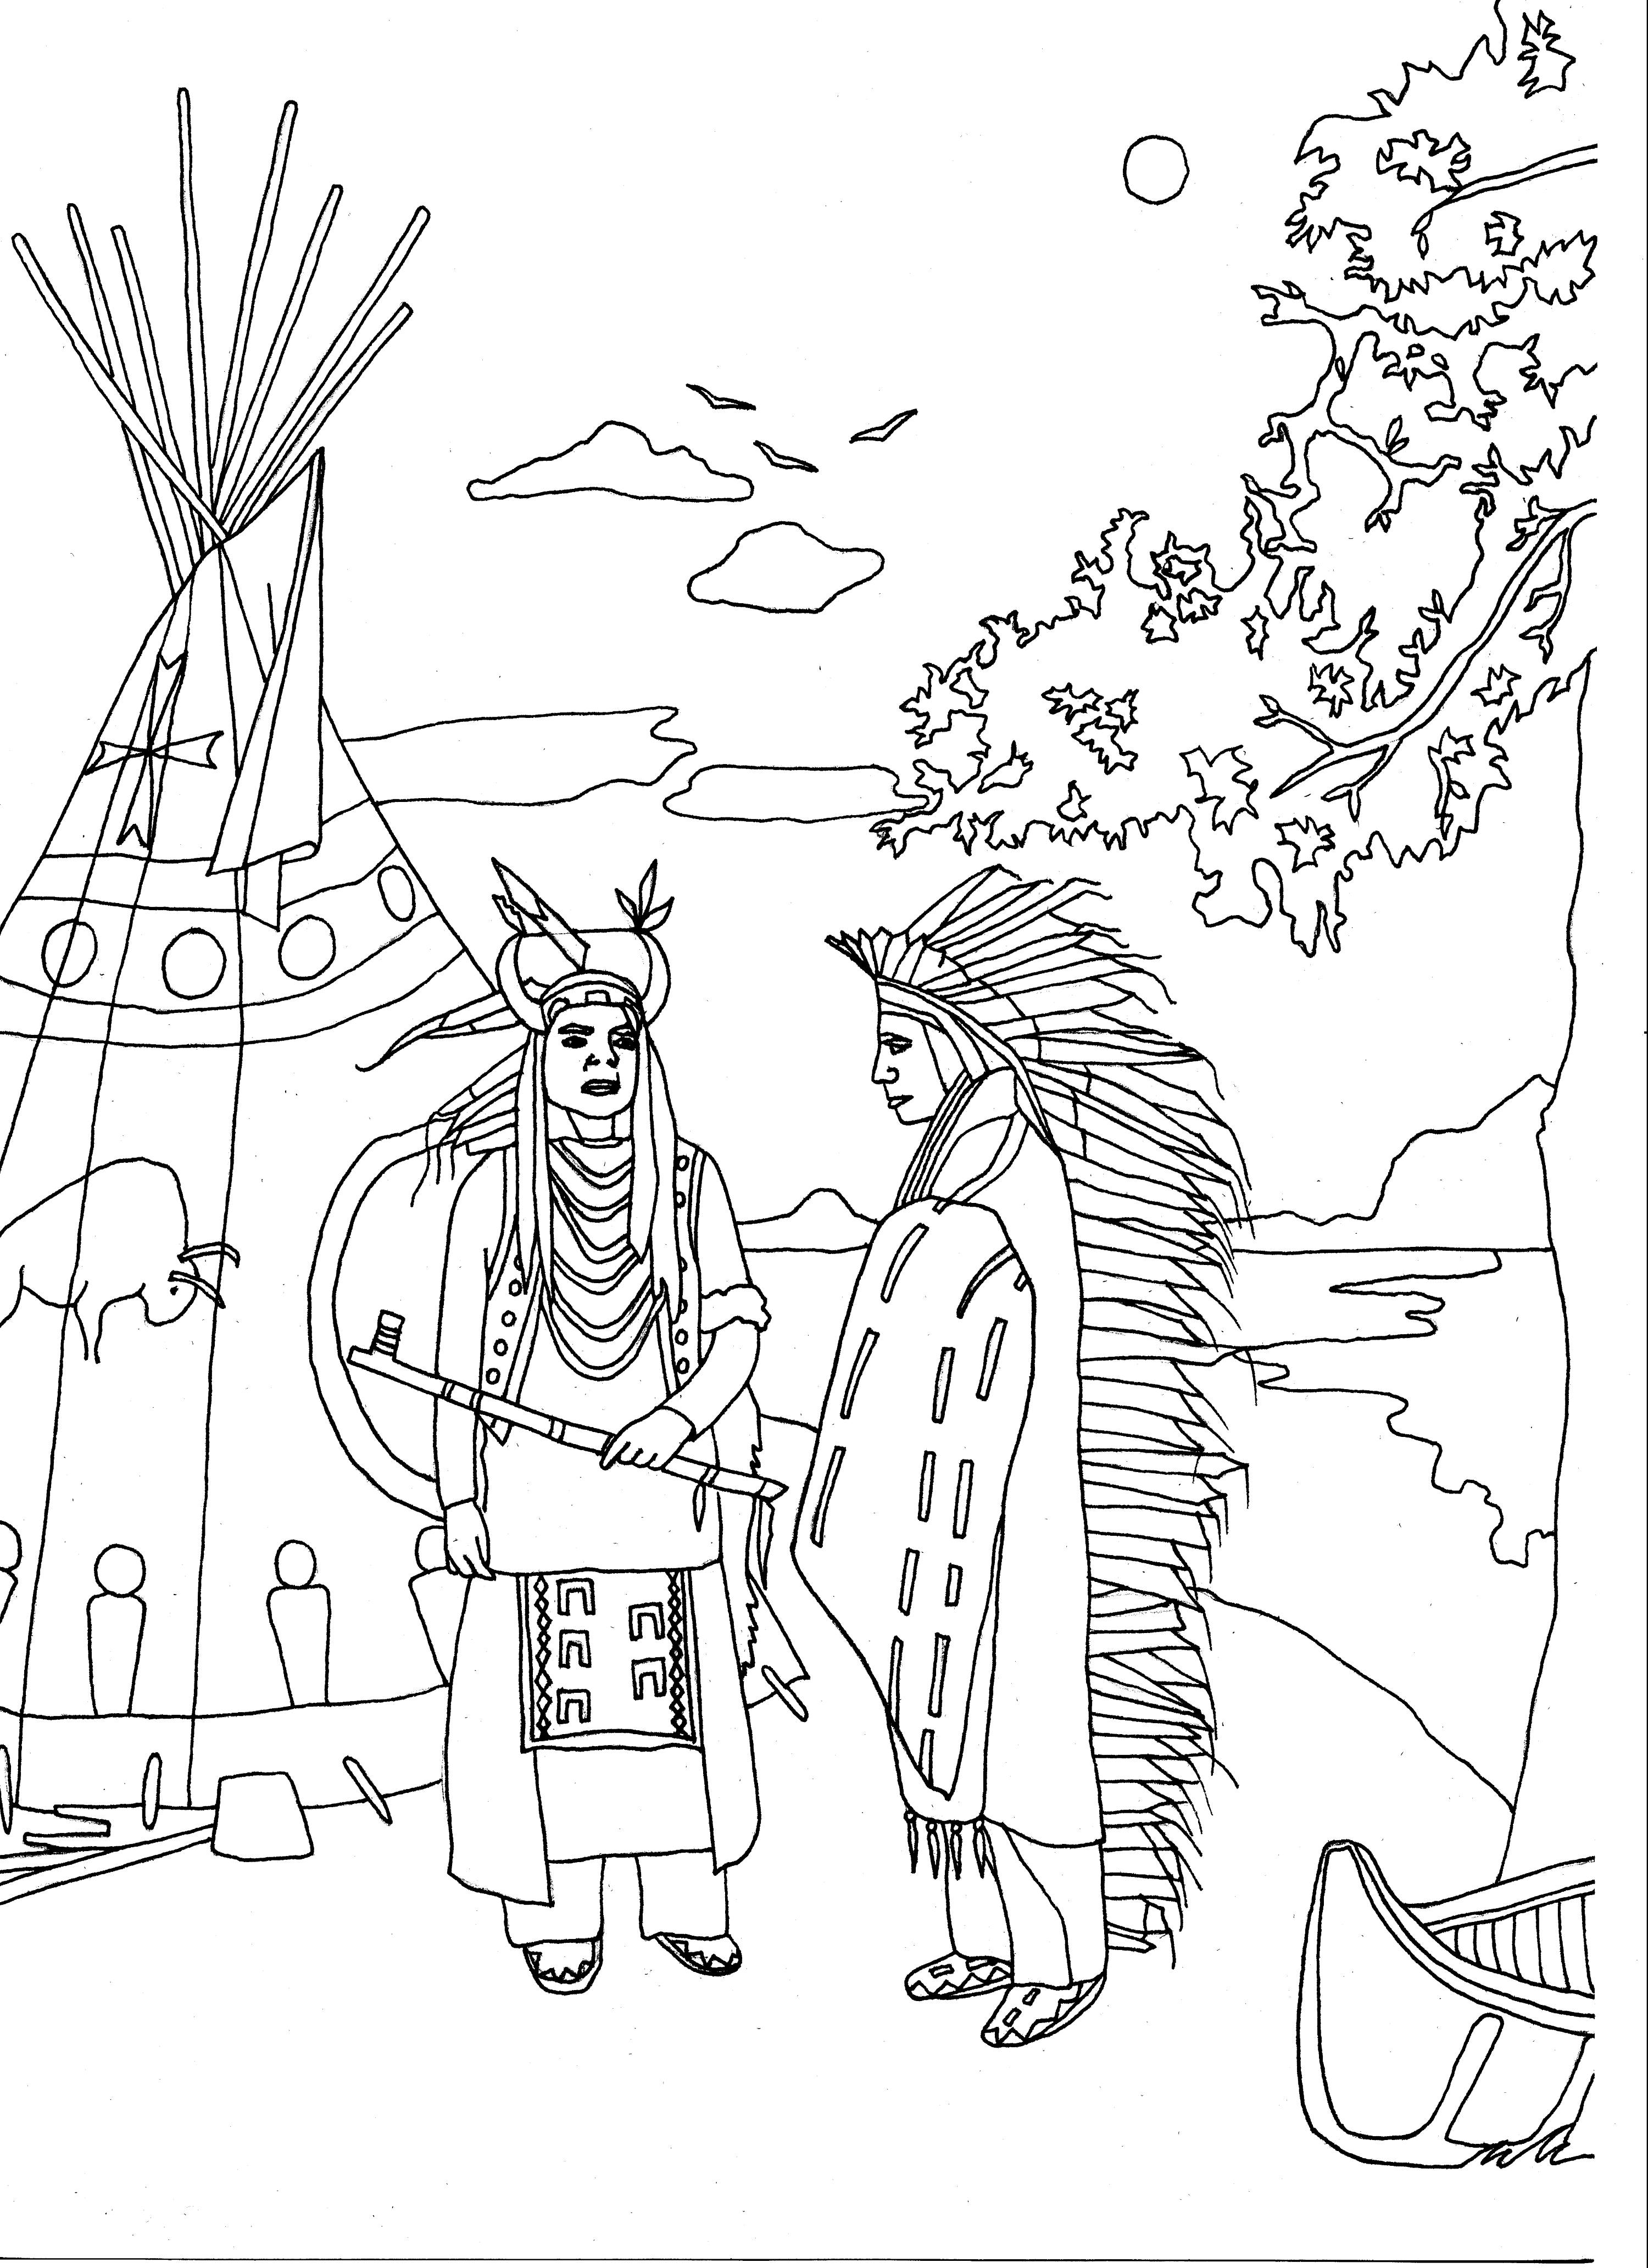 coloring-adult-two-native-americans-by-marion-c